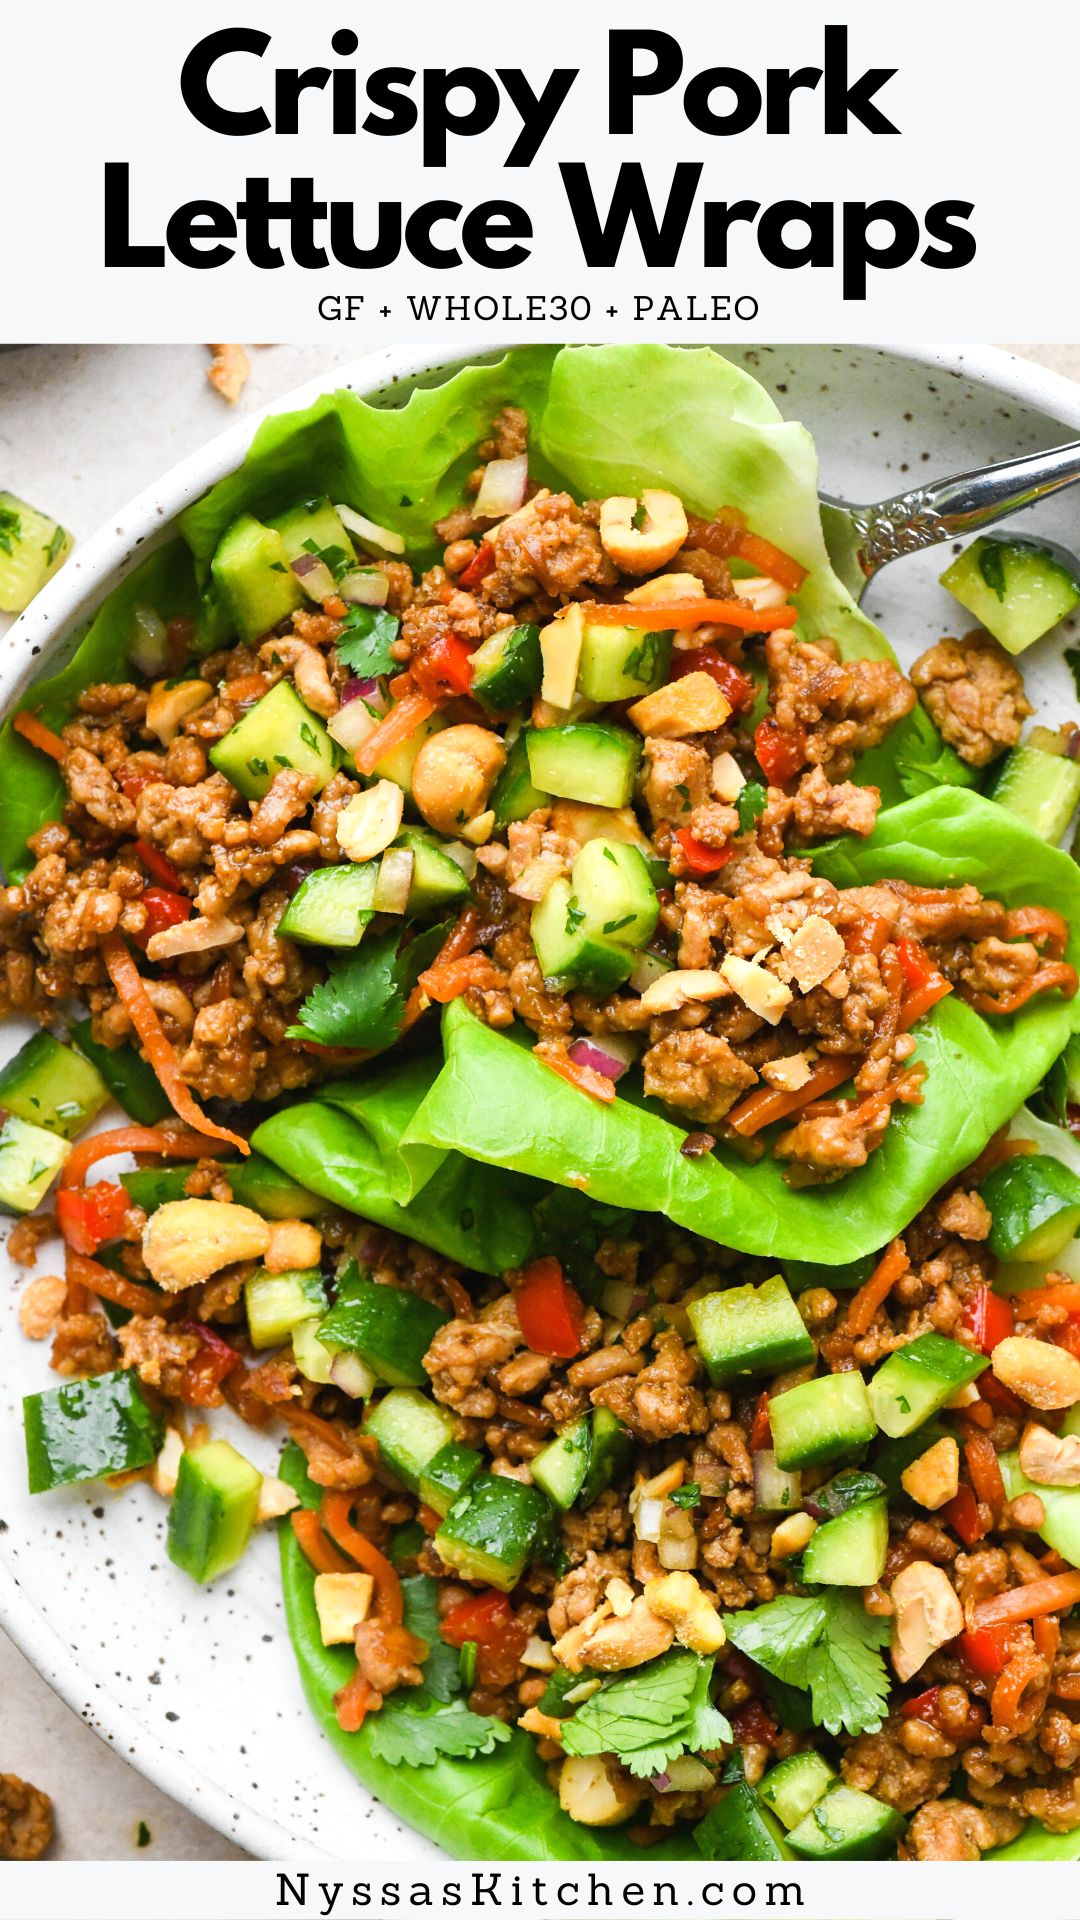 These pork lettuce wraps are a vibrant and flavorful recipe that is ready in less than 30 minutes! Protein rich and made with lots of veggies for an asian inspired meal you'll feel good about serving to the whole family. Gluten free, dairy free, soy free, Whole30 compatible, and Paleo.